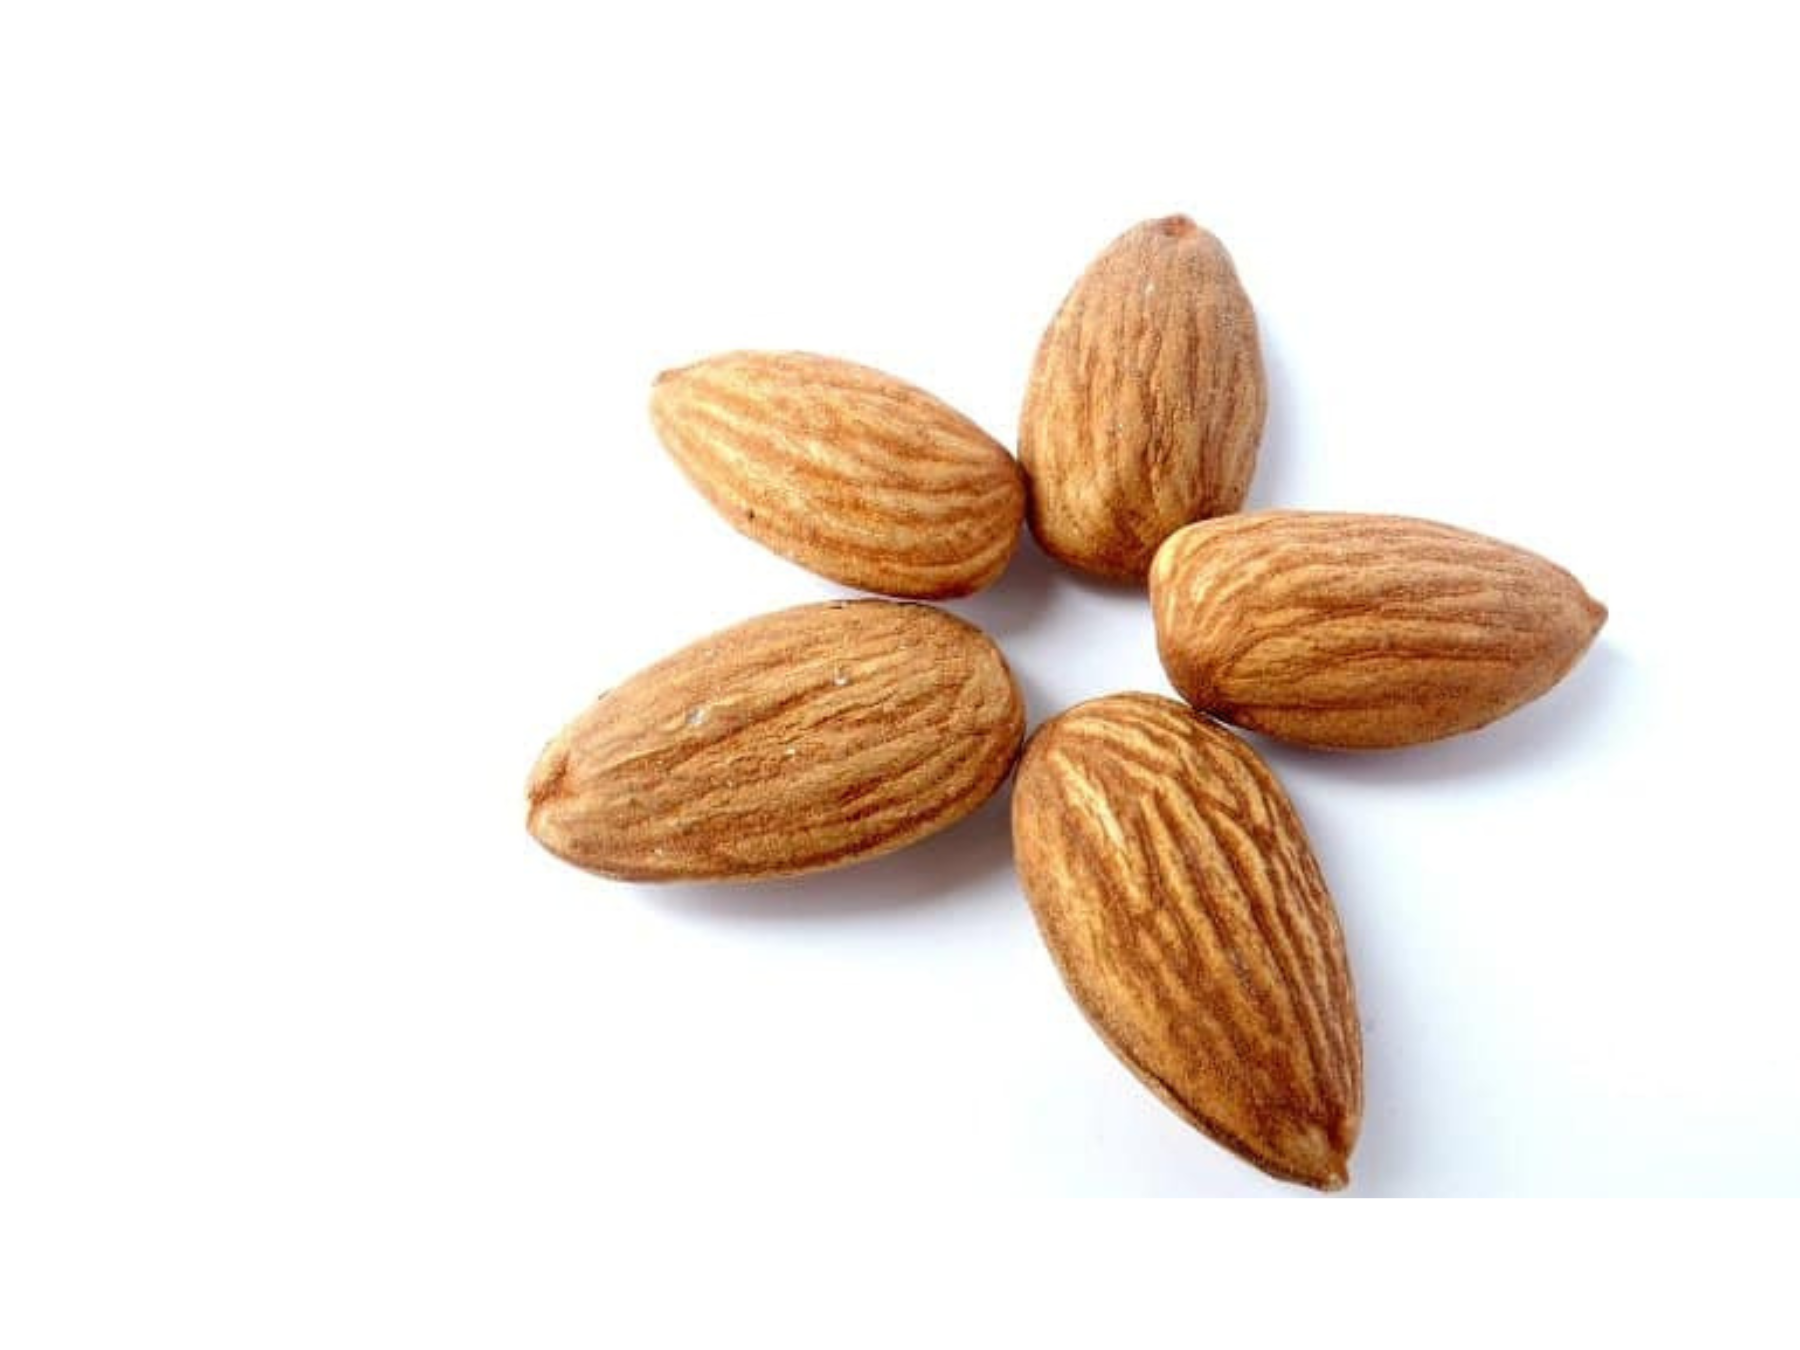 Eating Almonds Daily Boosts Exercise Recovery Molecule by 69% Among ‘Weekend Warriors’